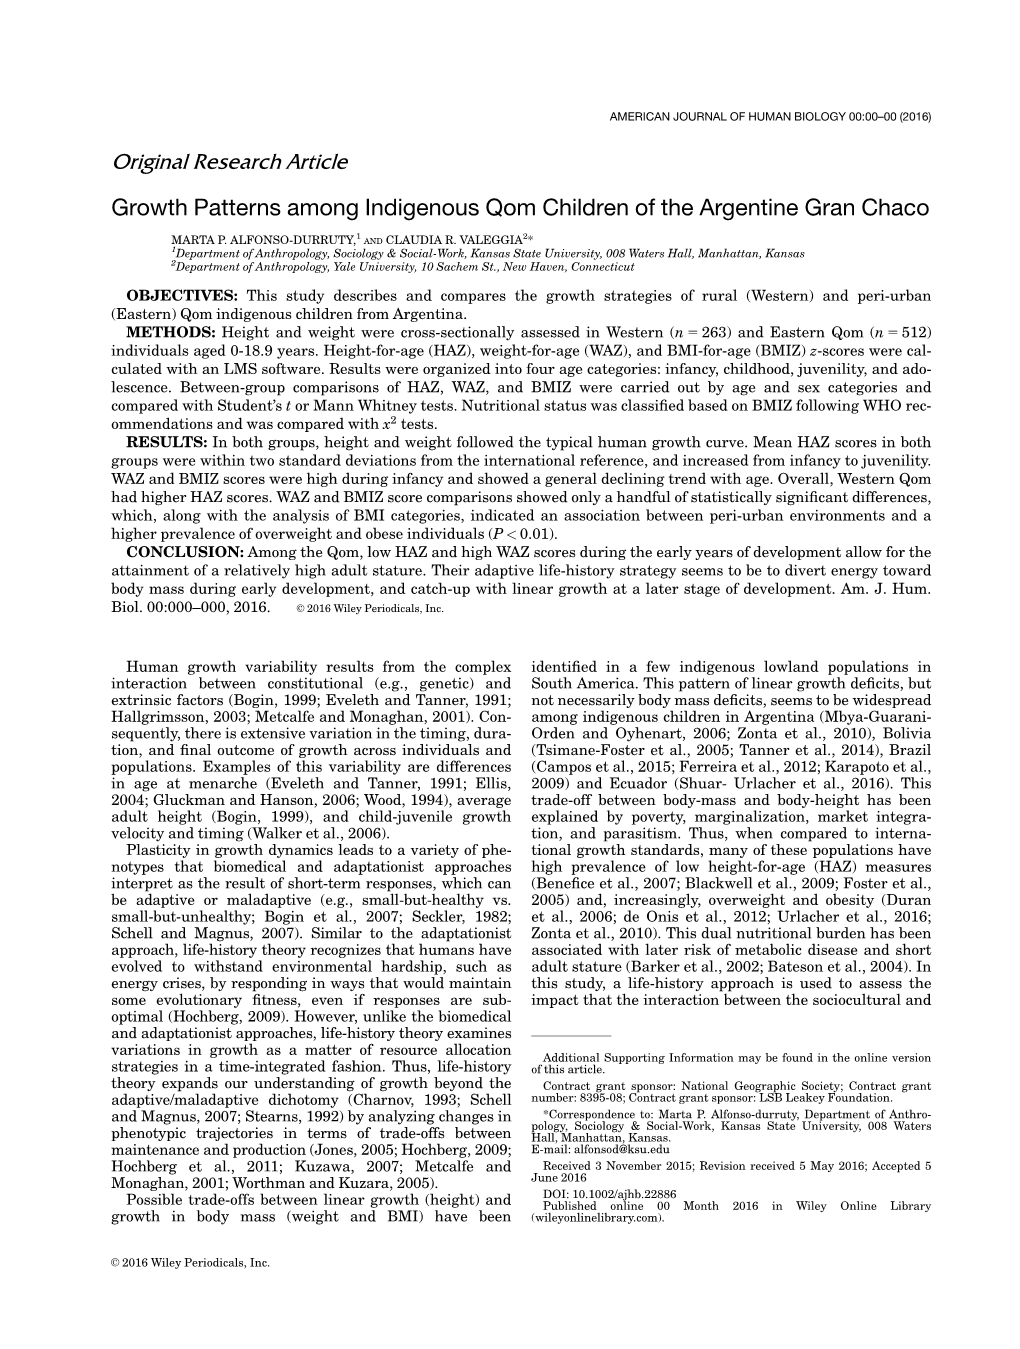 Growth Patterns Among Indigenous Qom Children of the Argentine Gran Chaco